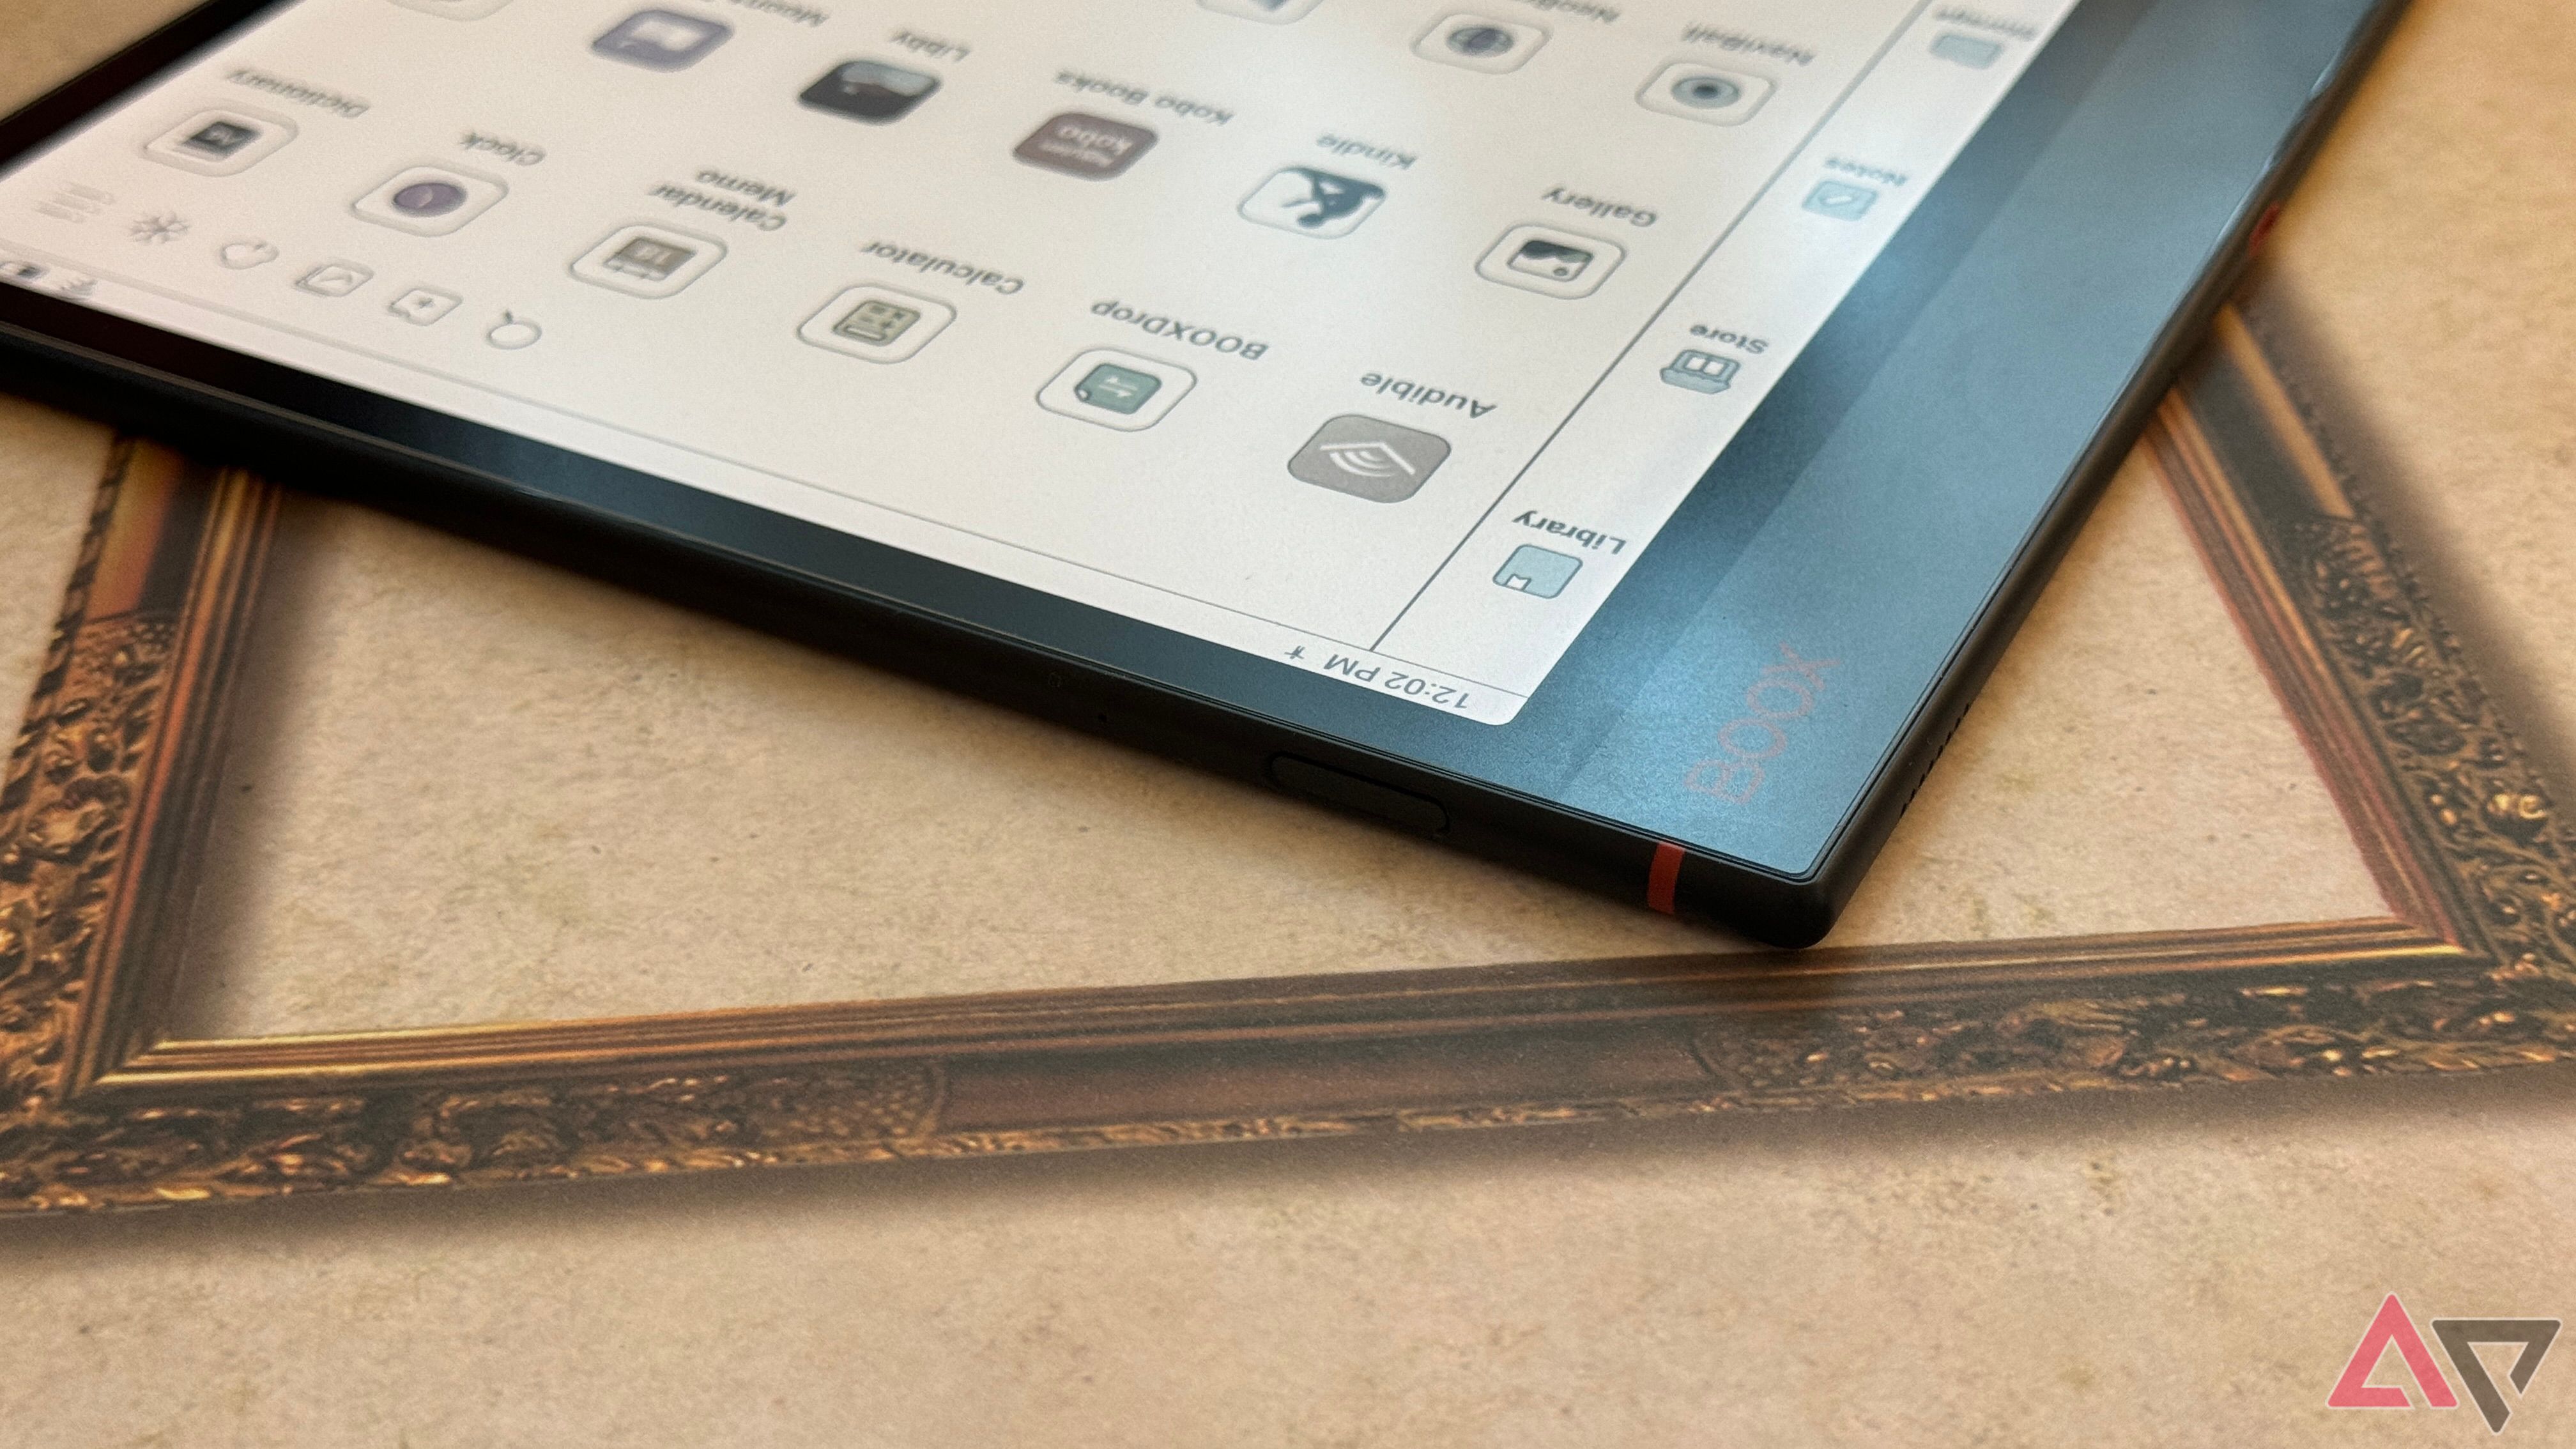 Onyx Boox Note Air 3C review: Filling the void between tablet and